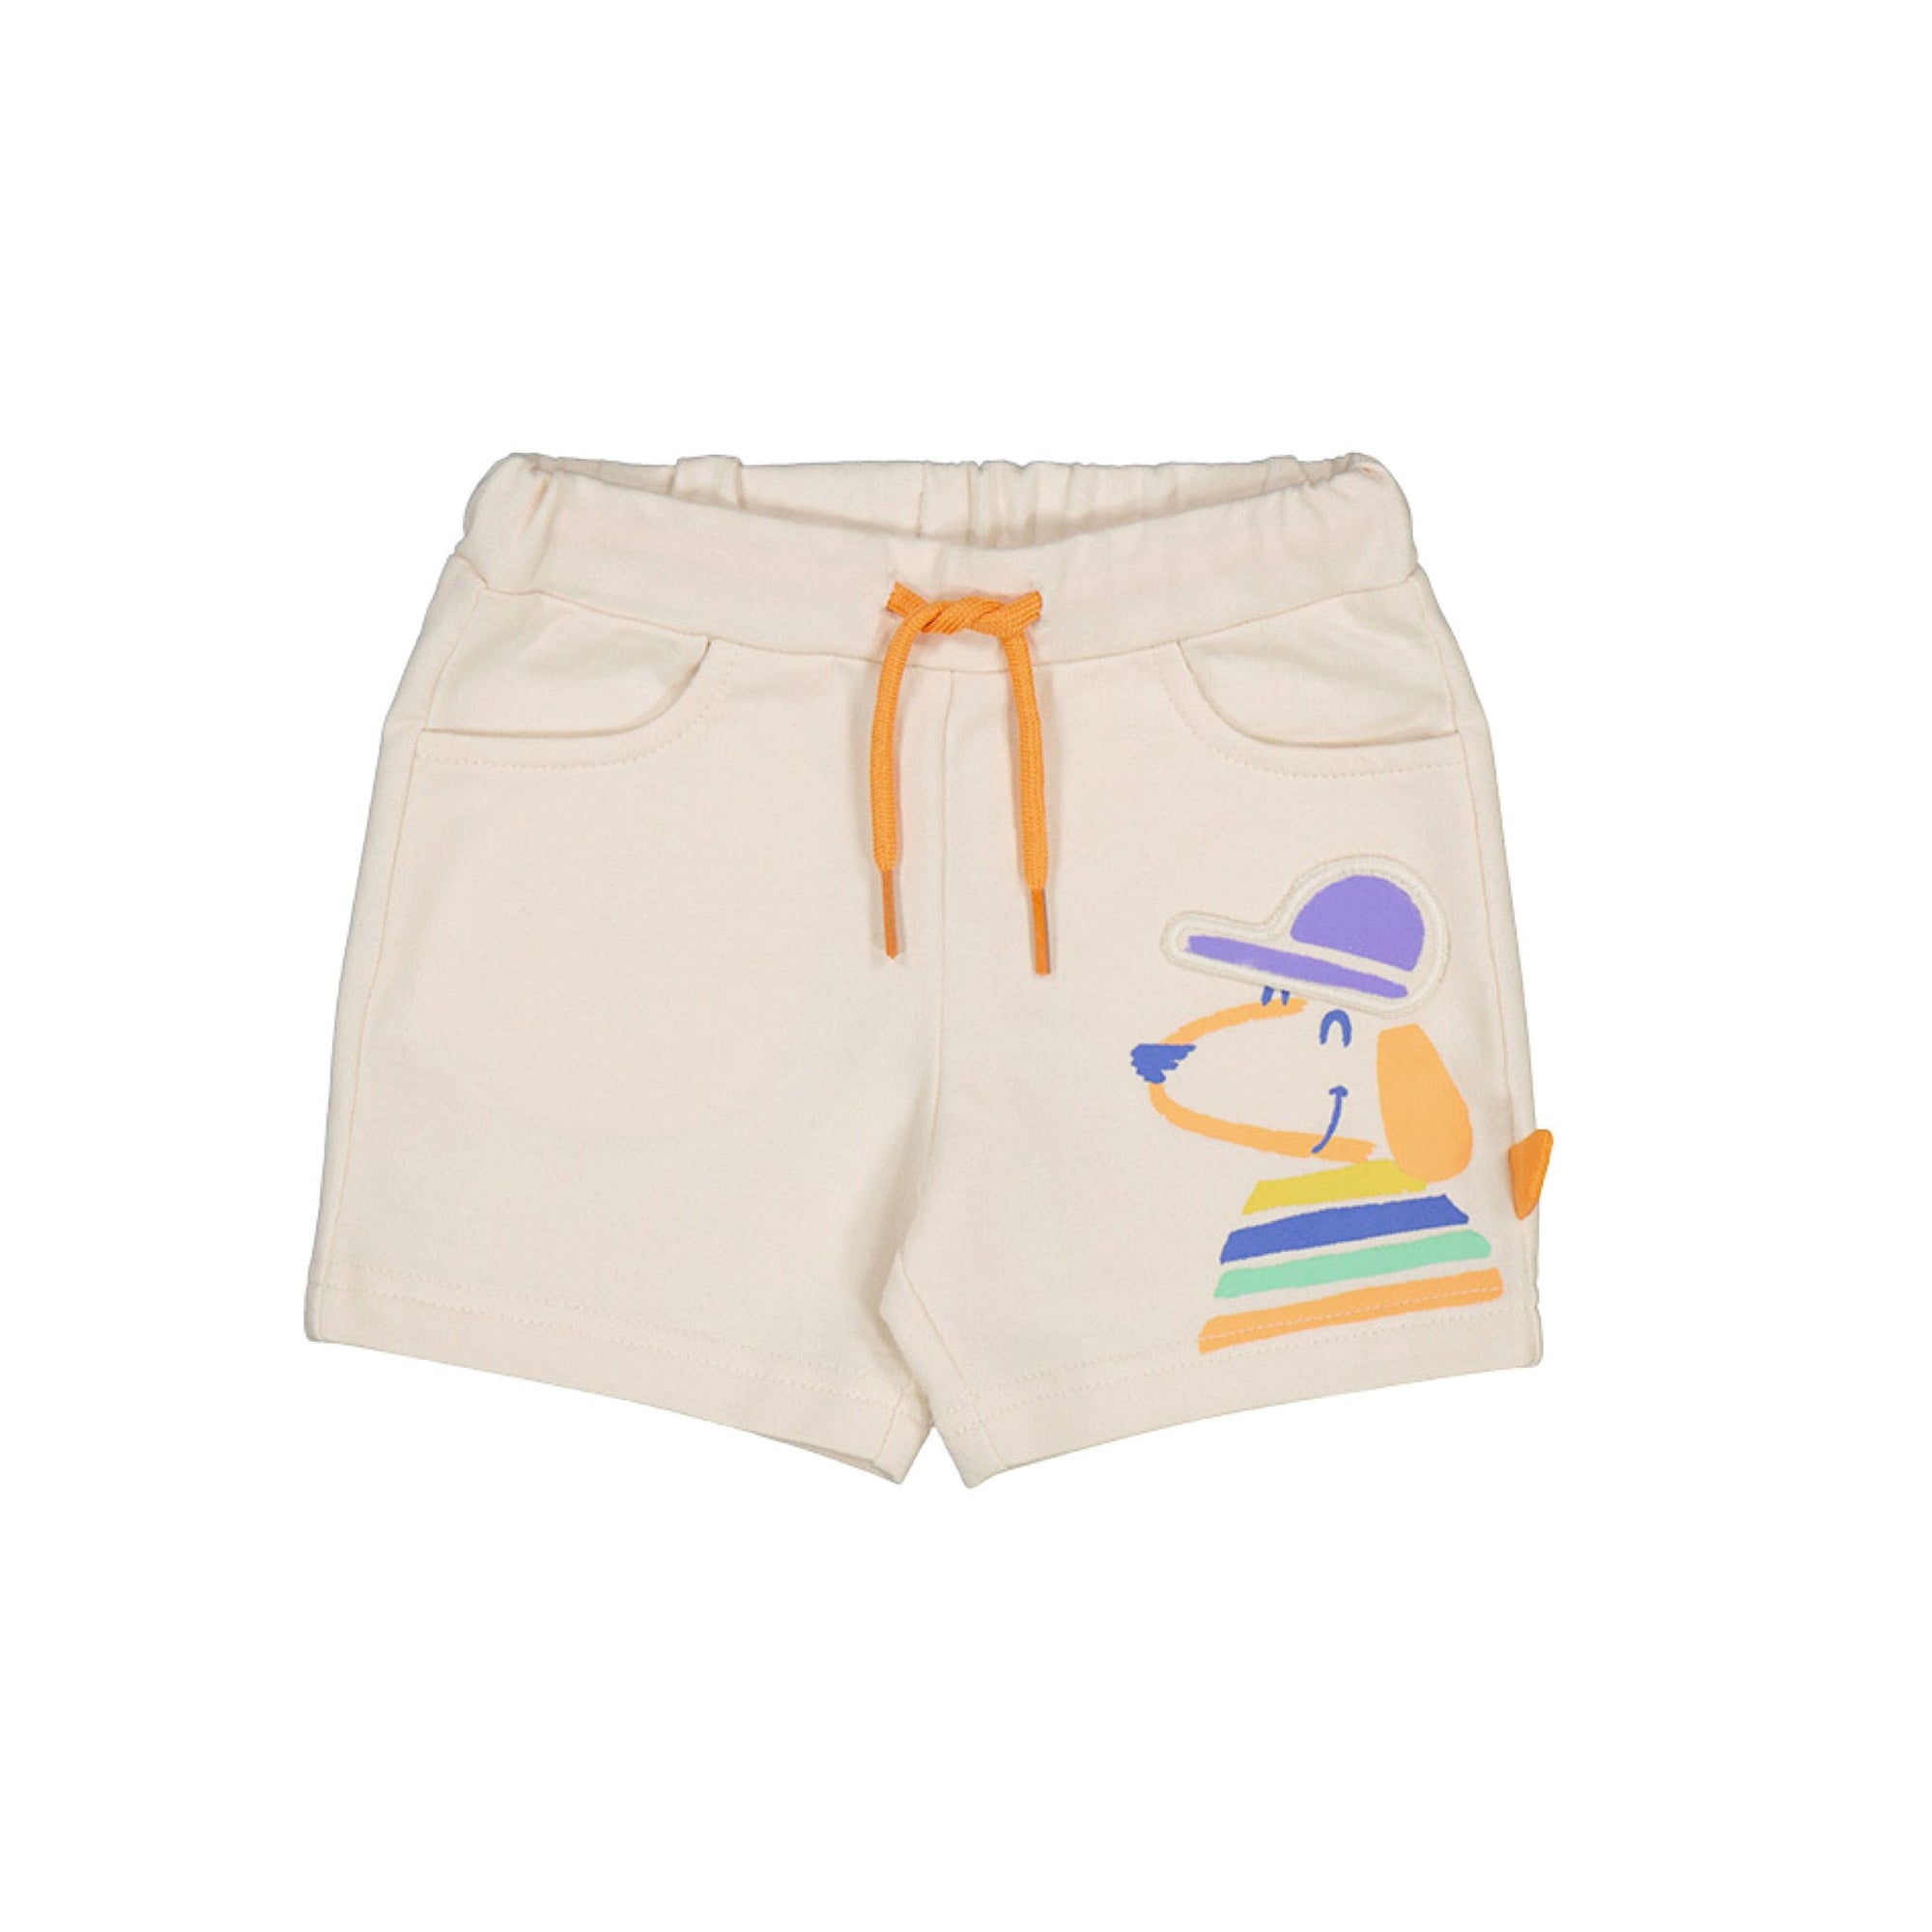 Puppy Graphic Knit Short